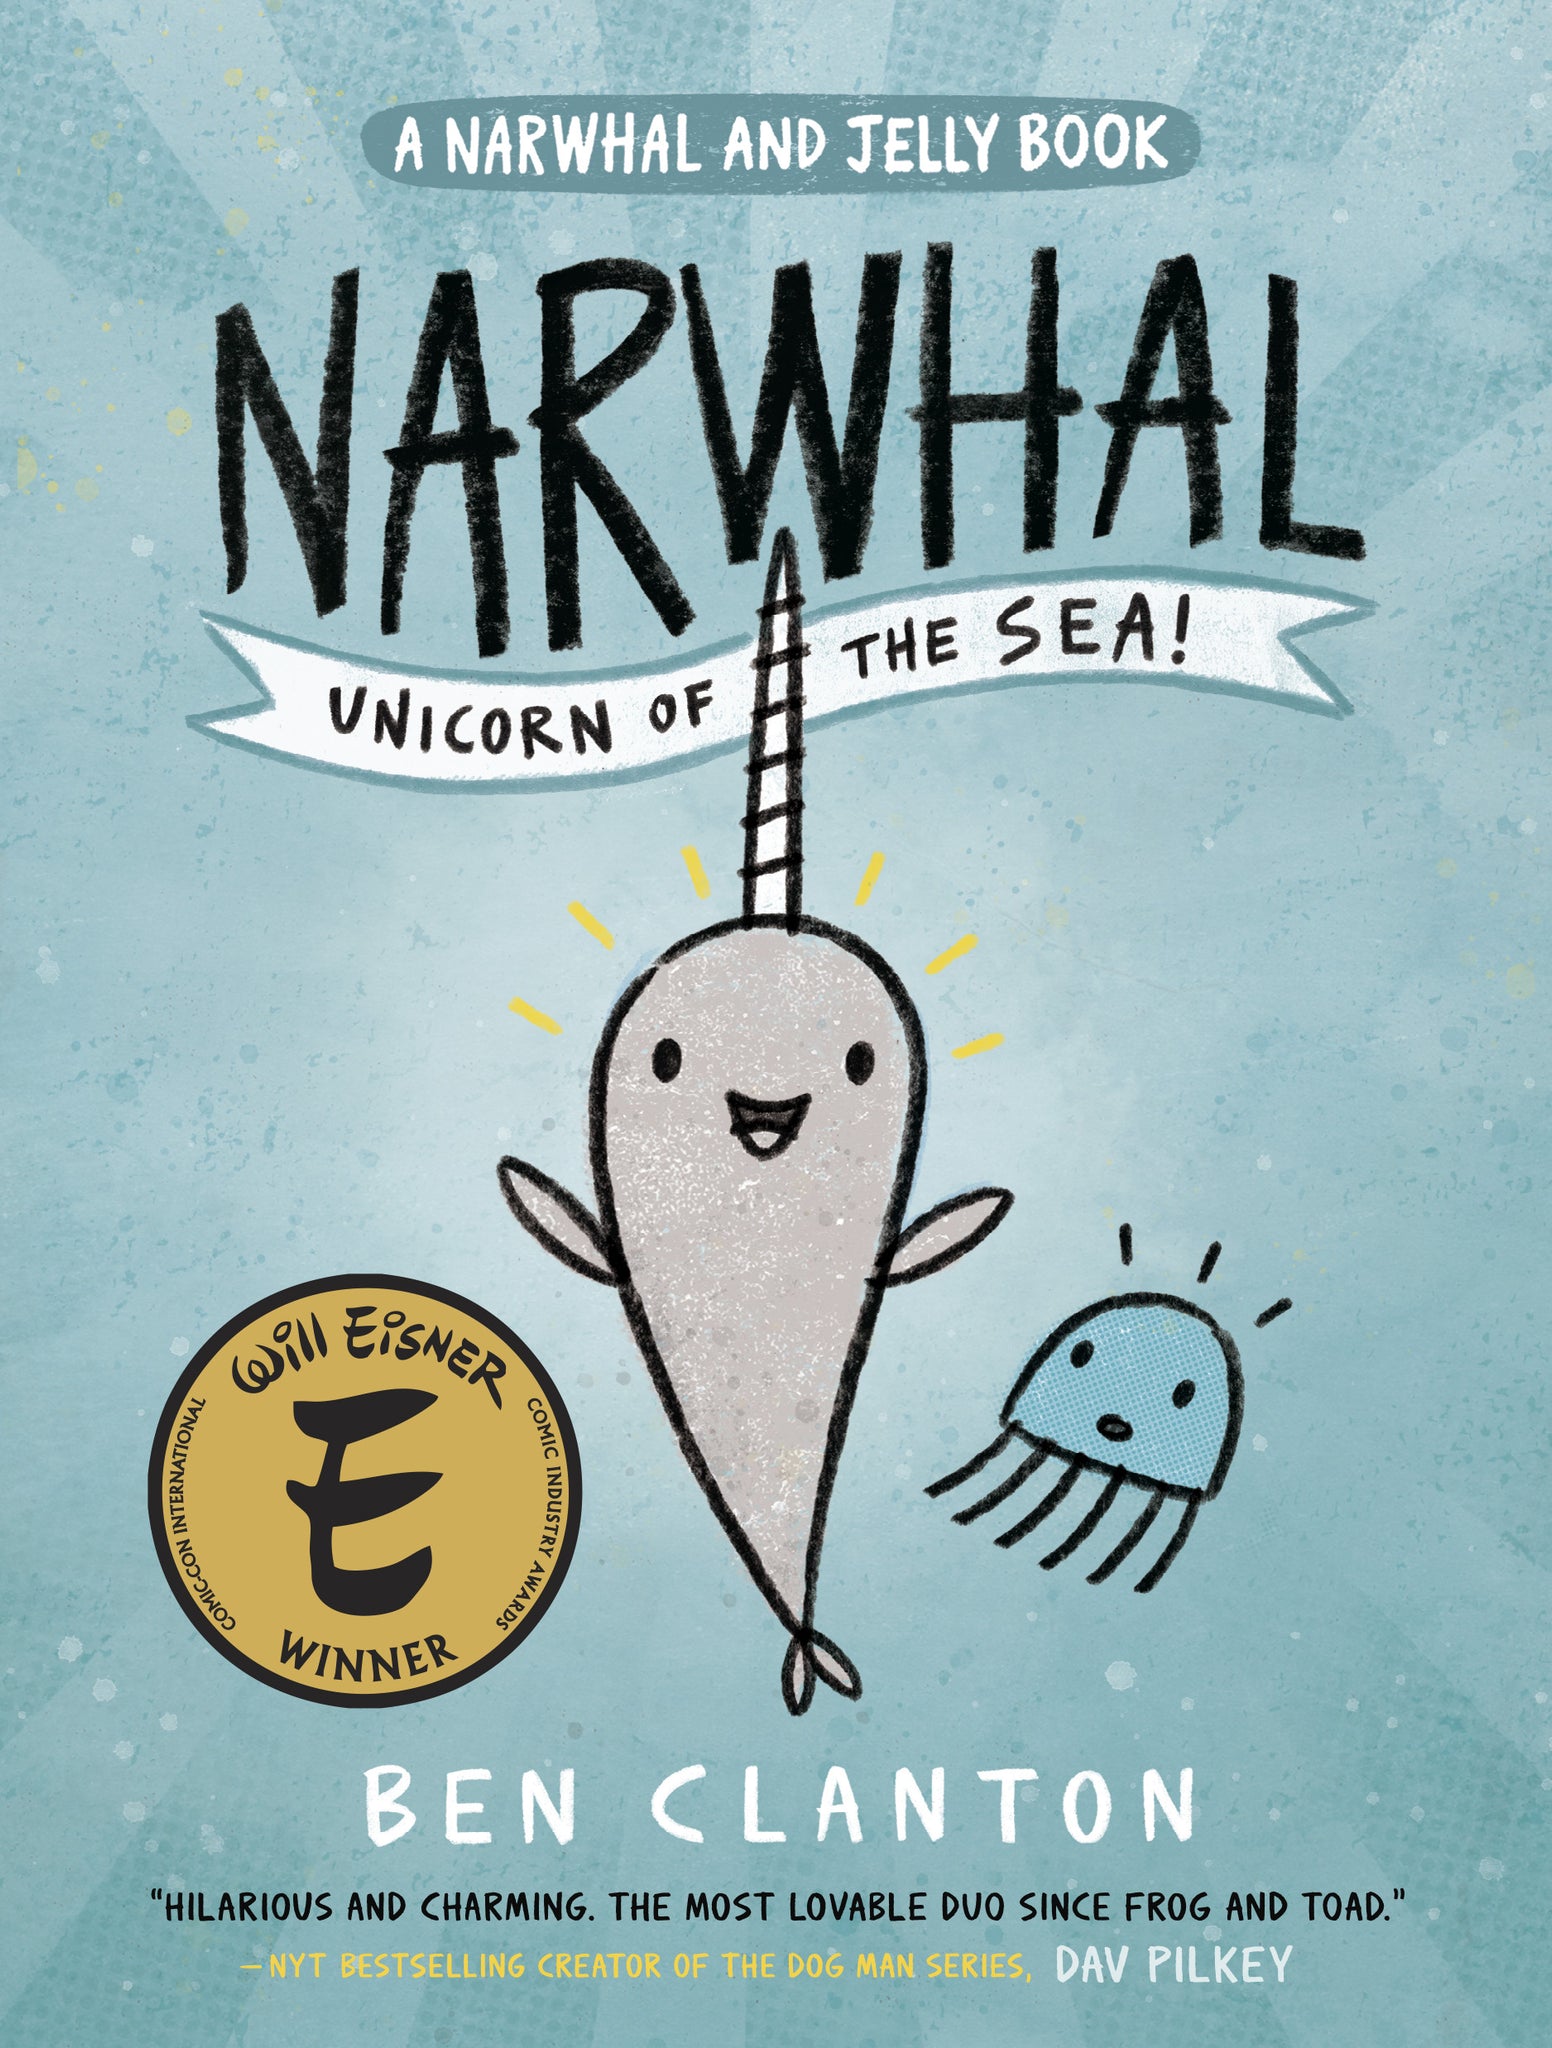 narwhal: unicorn of the sea! (a narwhal and jelly book #1)